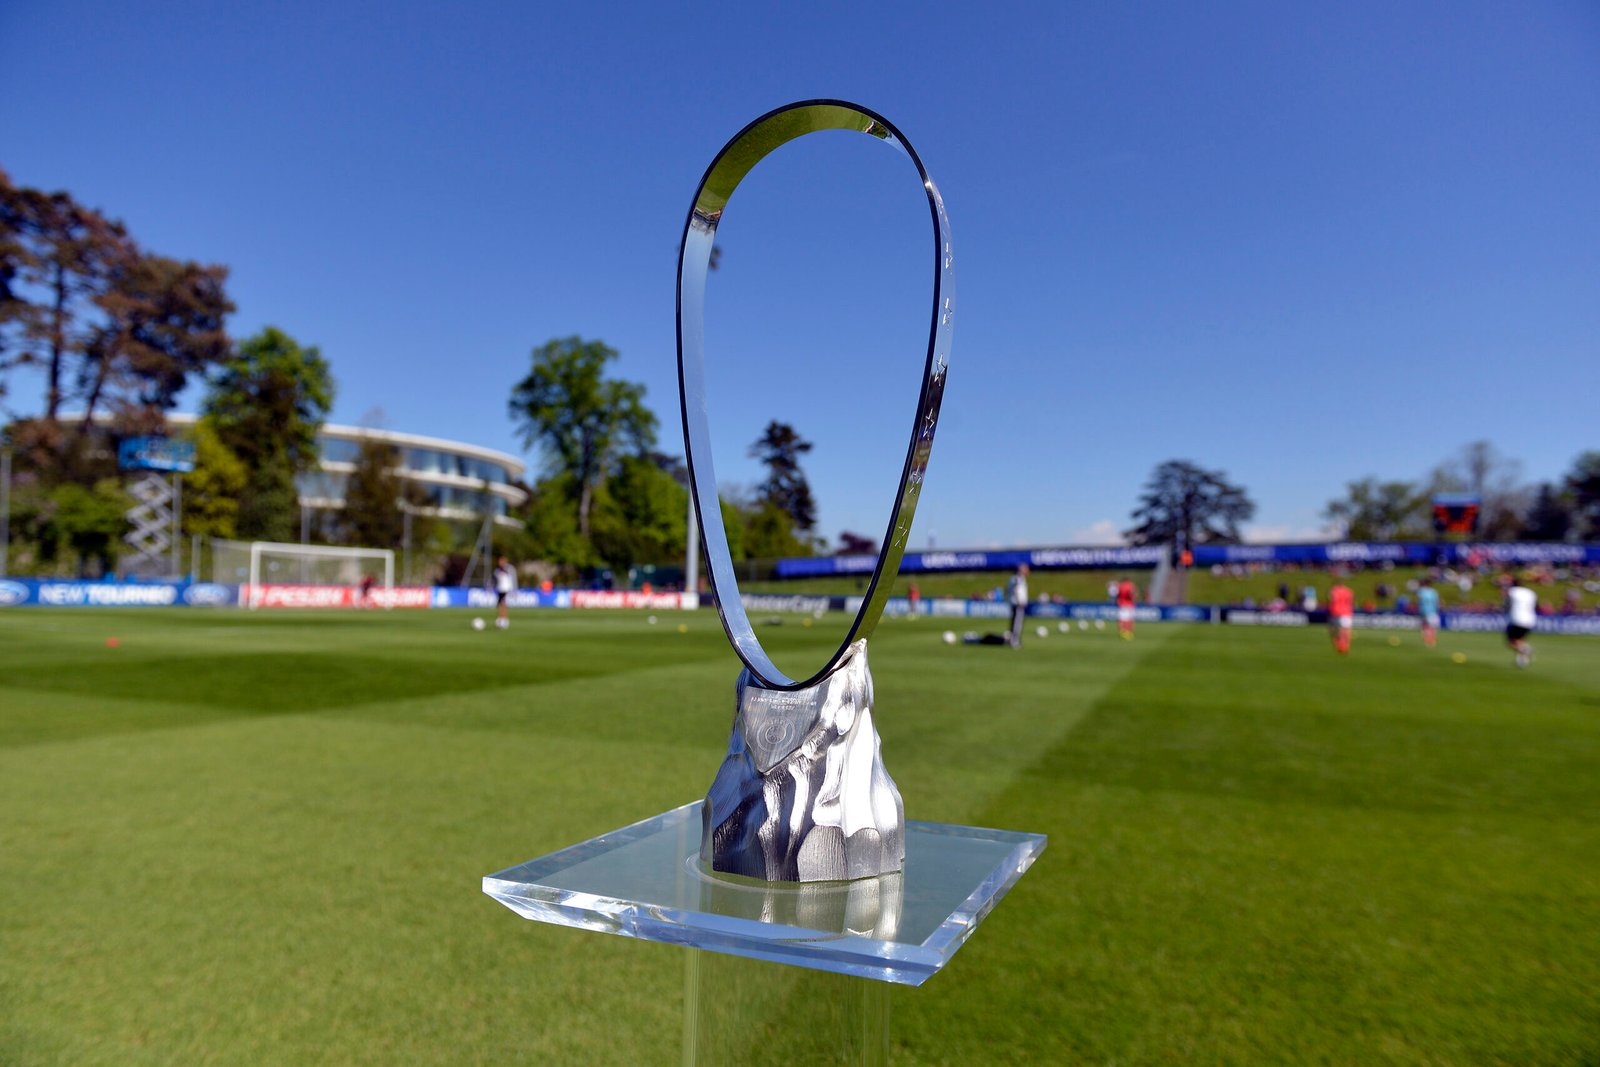 NYON, SWITZERLAND - APRIL 14: The Lennart Johansson trophy, the trophy of the UEFA Youth League Final is displayed prior to the UEFA Youth League Final match between SL Benfica and FC Barcelona at Colovray Stadium on April 14, 2014 in Nyon, Switzerland. (Photo by Harold Cunningham/Getty Images for UEFA)